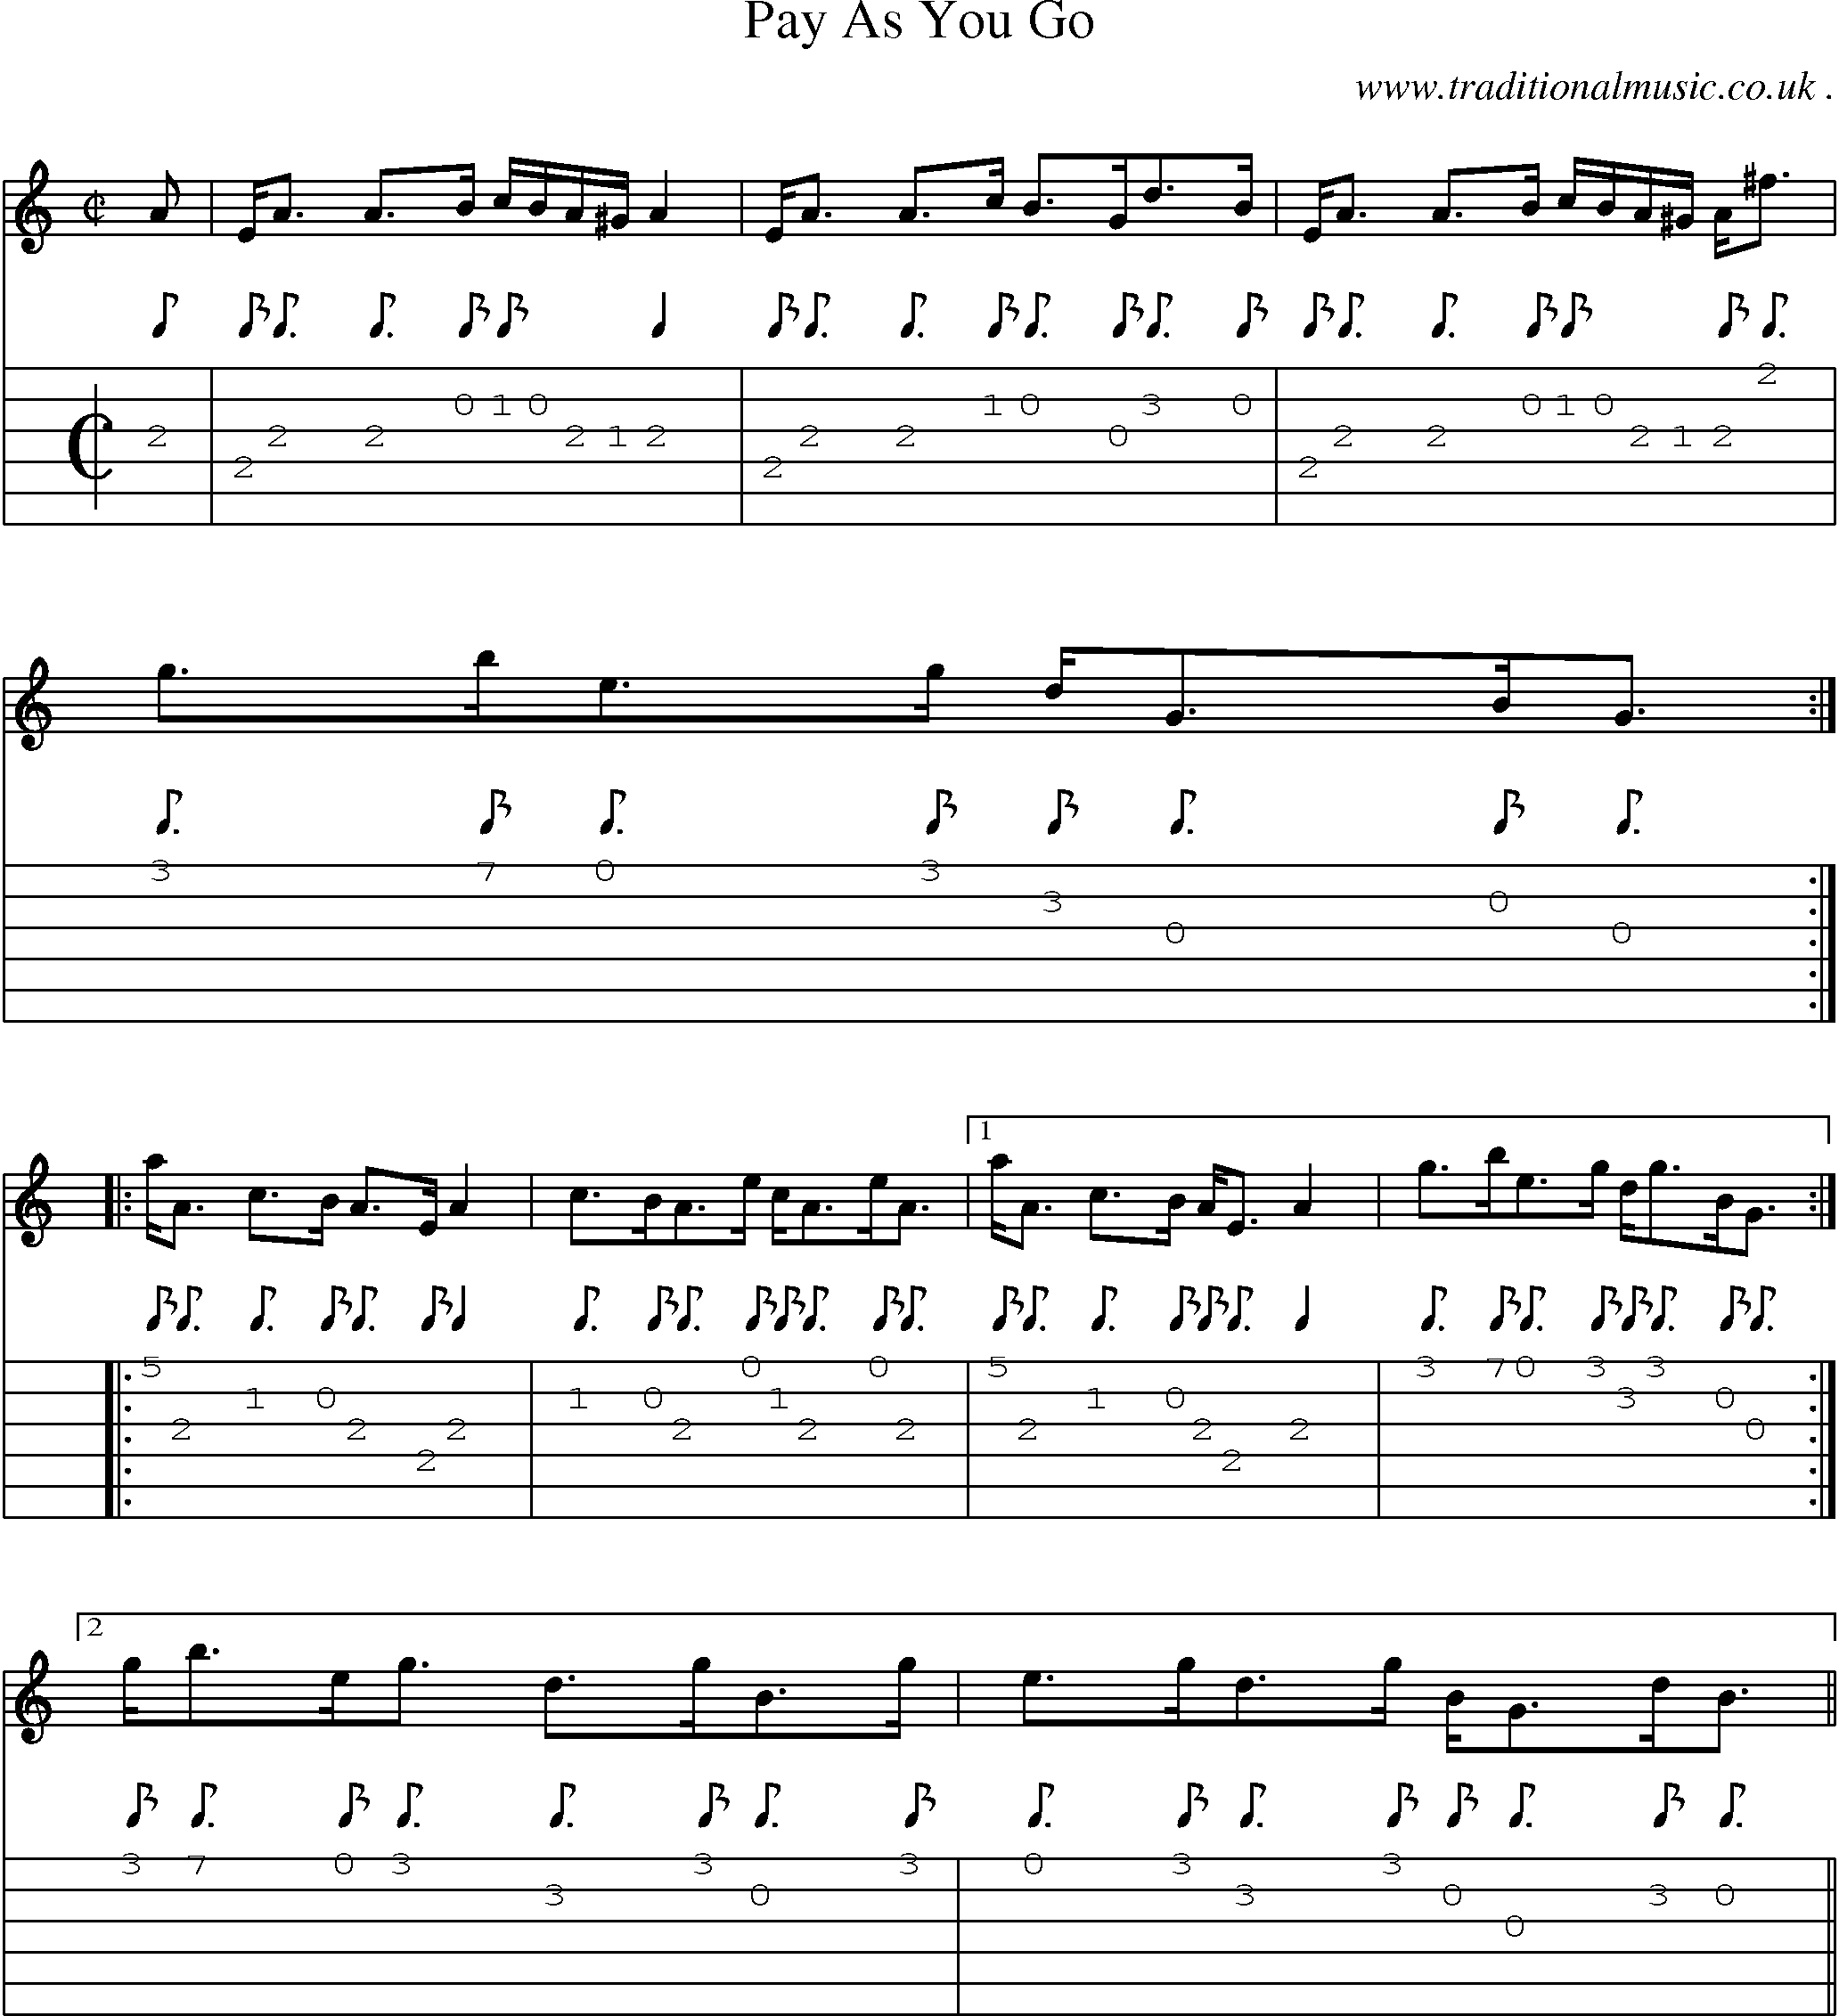 Sheet-music  score, Chords and Guitar Tabs for Pay As You Go